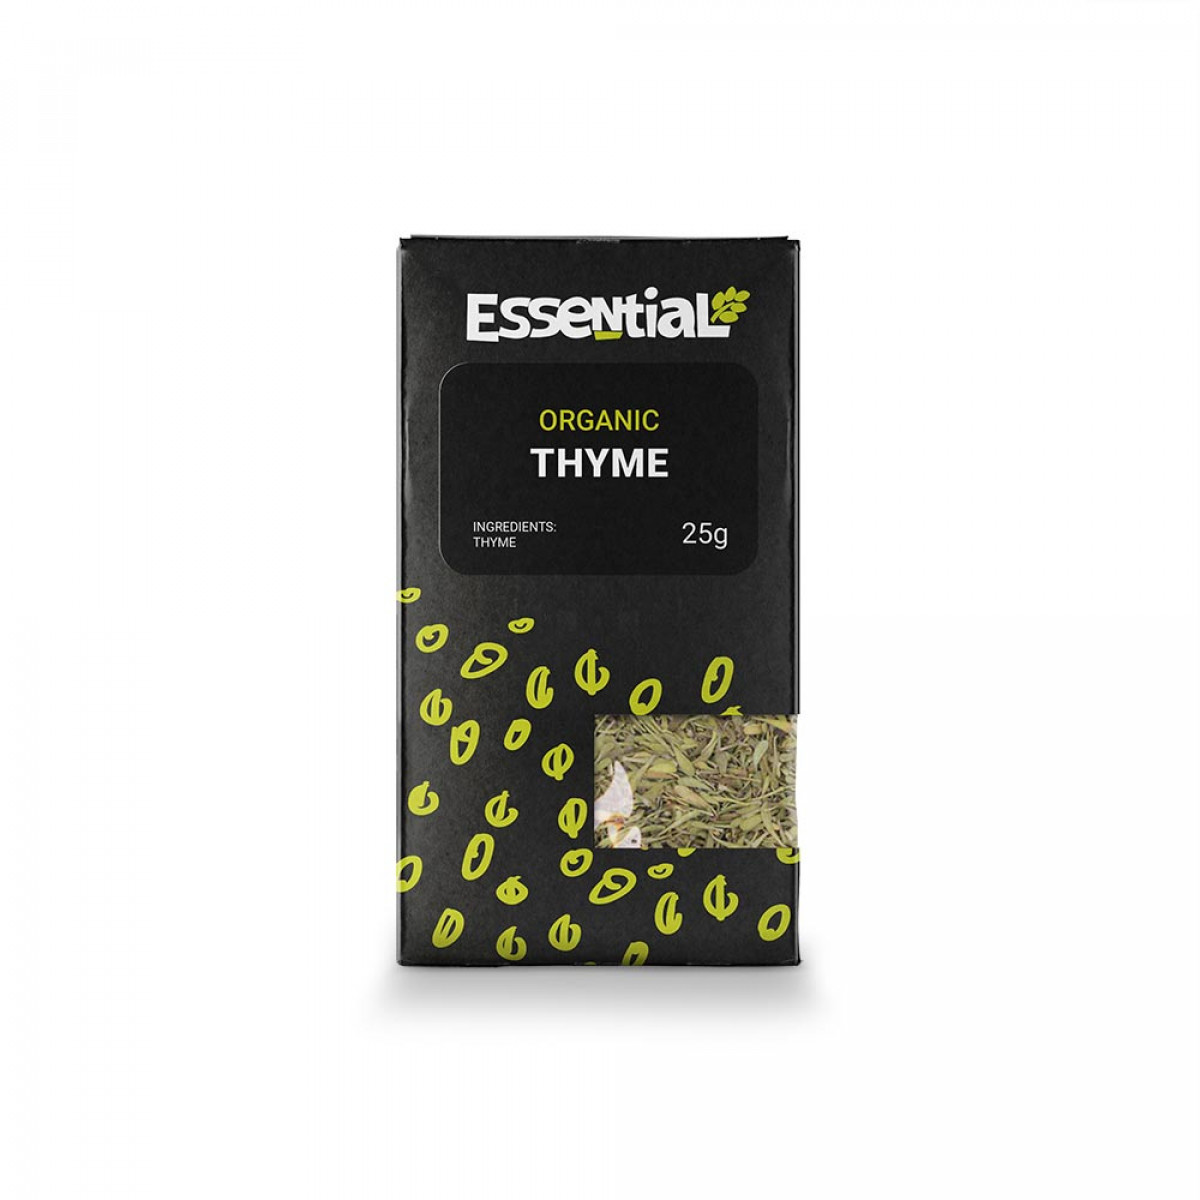 Product picture for Thyme